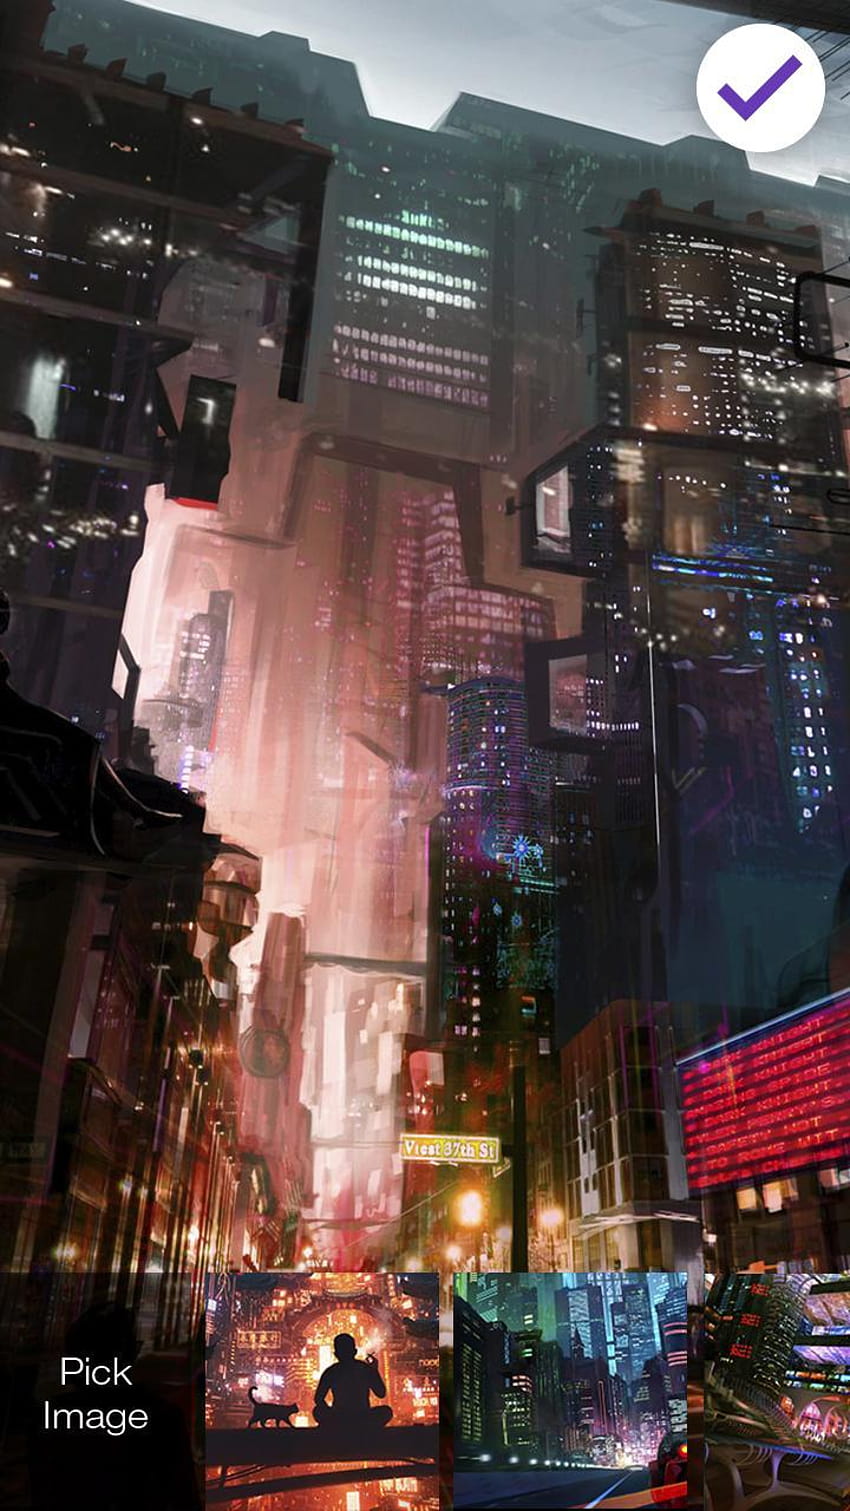 Cyberpunk Neon App Screen Lock for Android, cyberpunk city android HD phone wallpaper